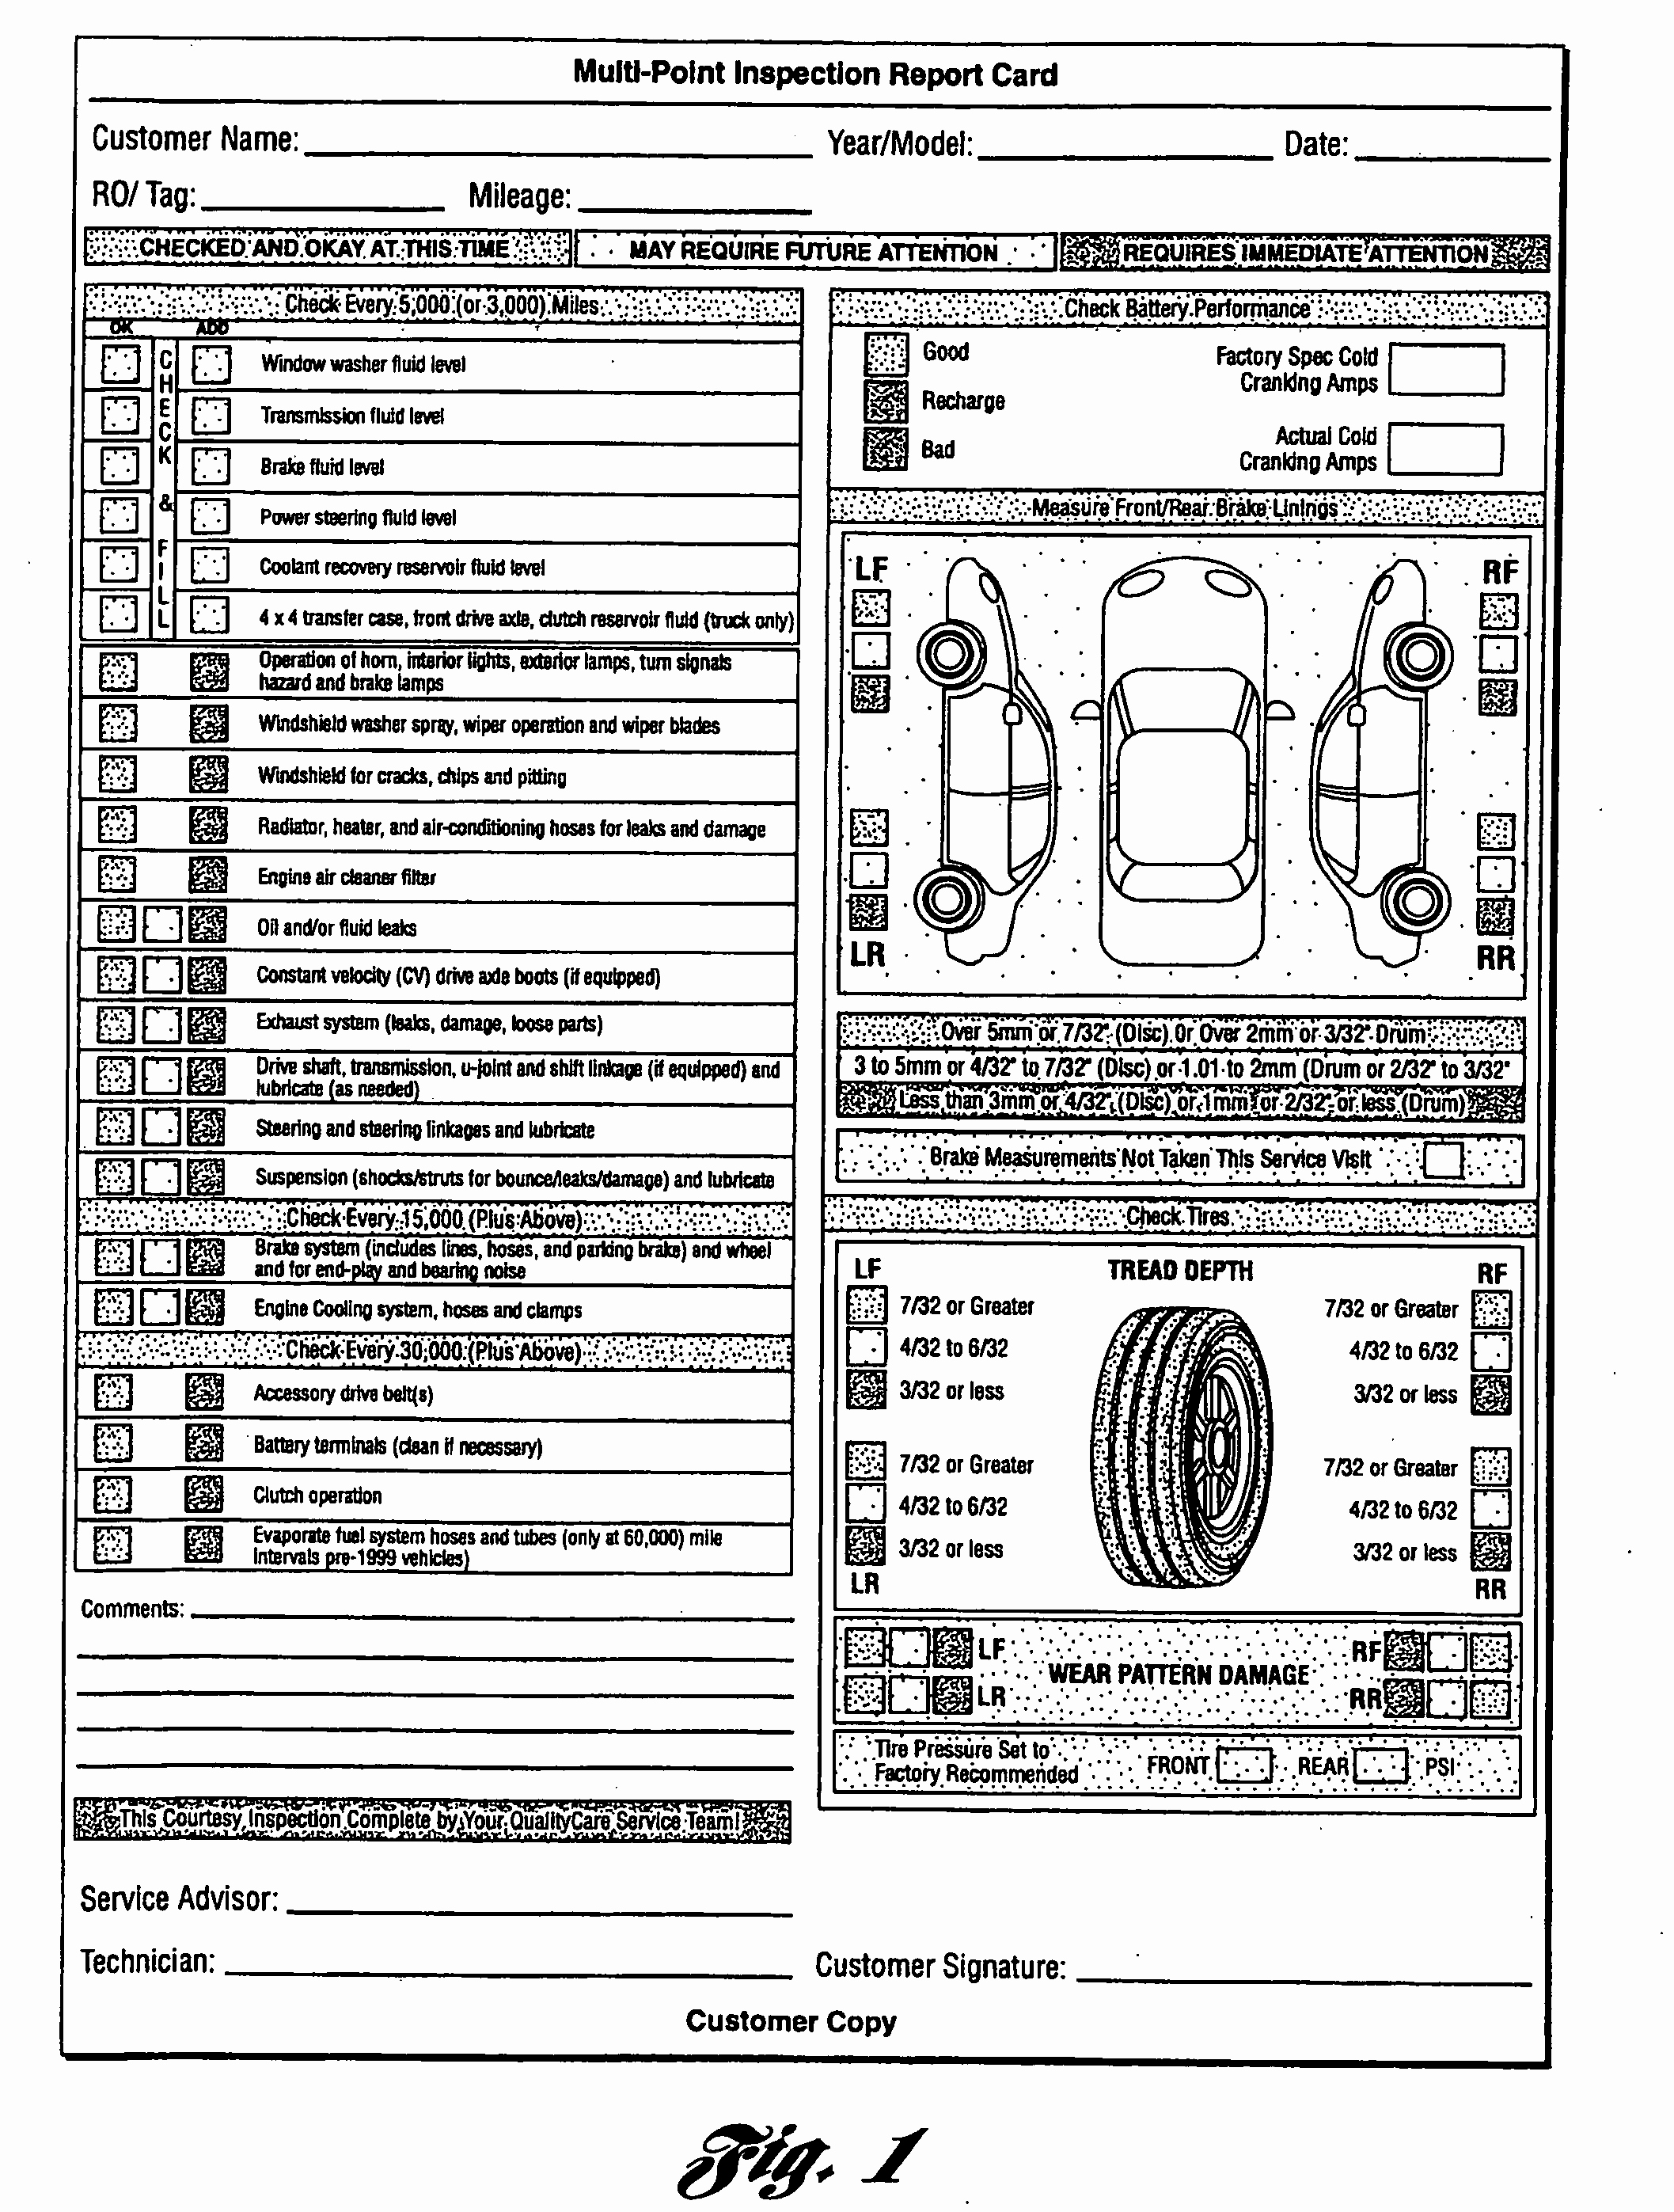 Daily Vehicle Inspection Report Template Fresh Multi Point Inspection Report Card as Re Mended by ford Motor Pany 6